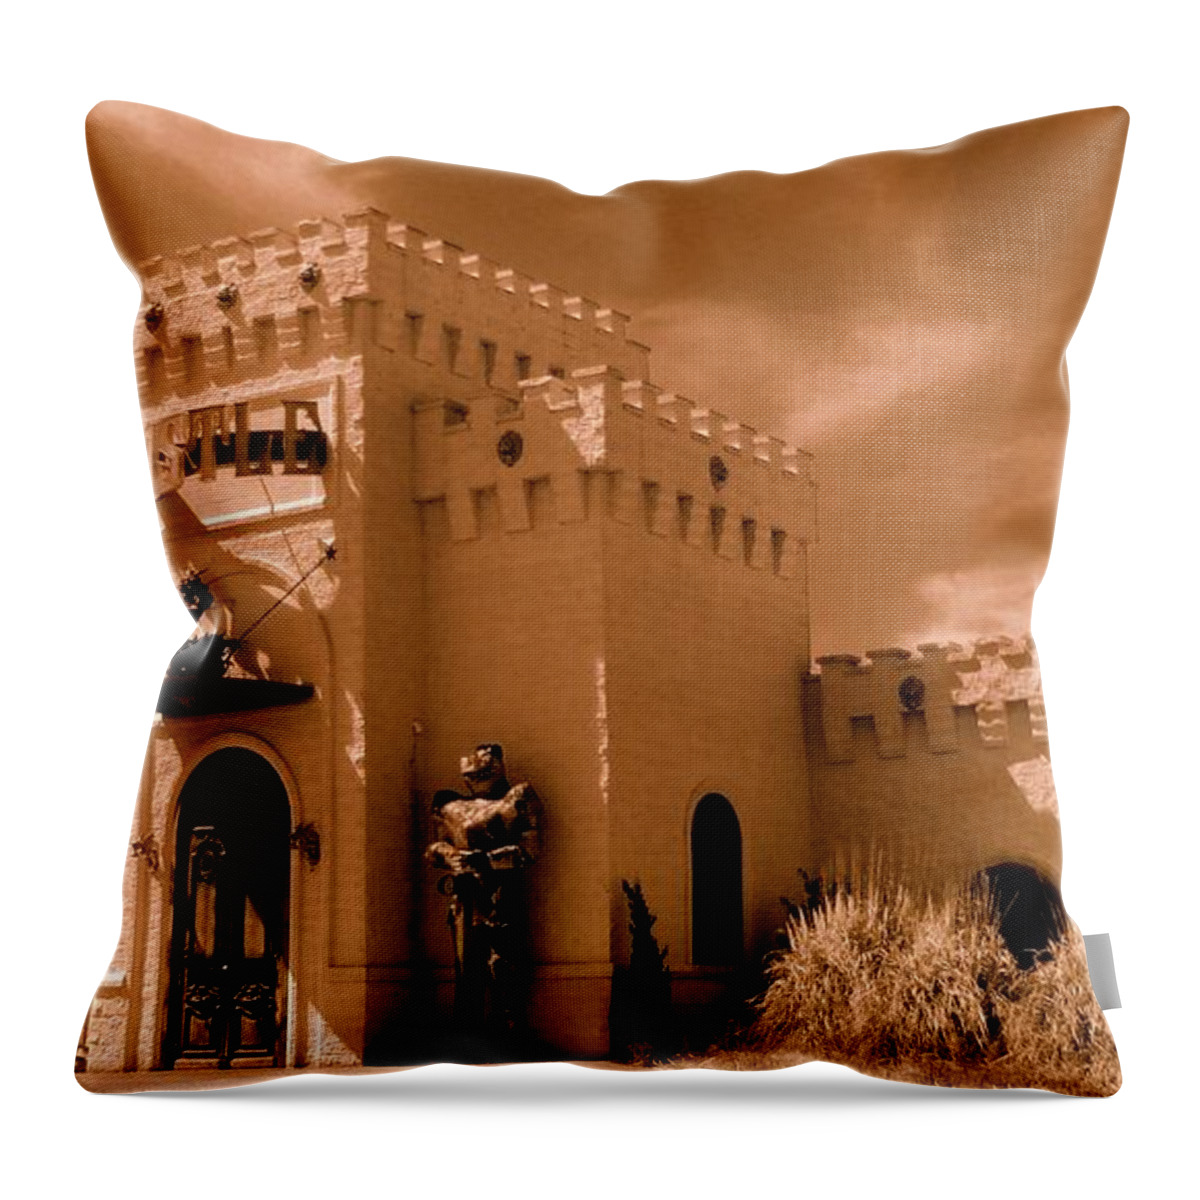 Castle Throw Pillow featuring the photograph Castle By The Road by Rodney Lee Williams